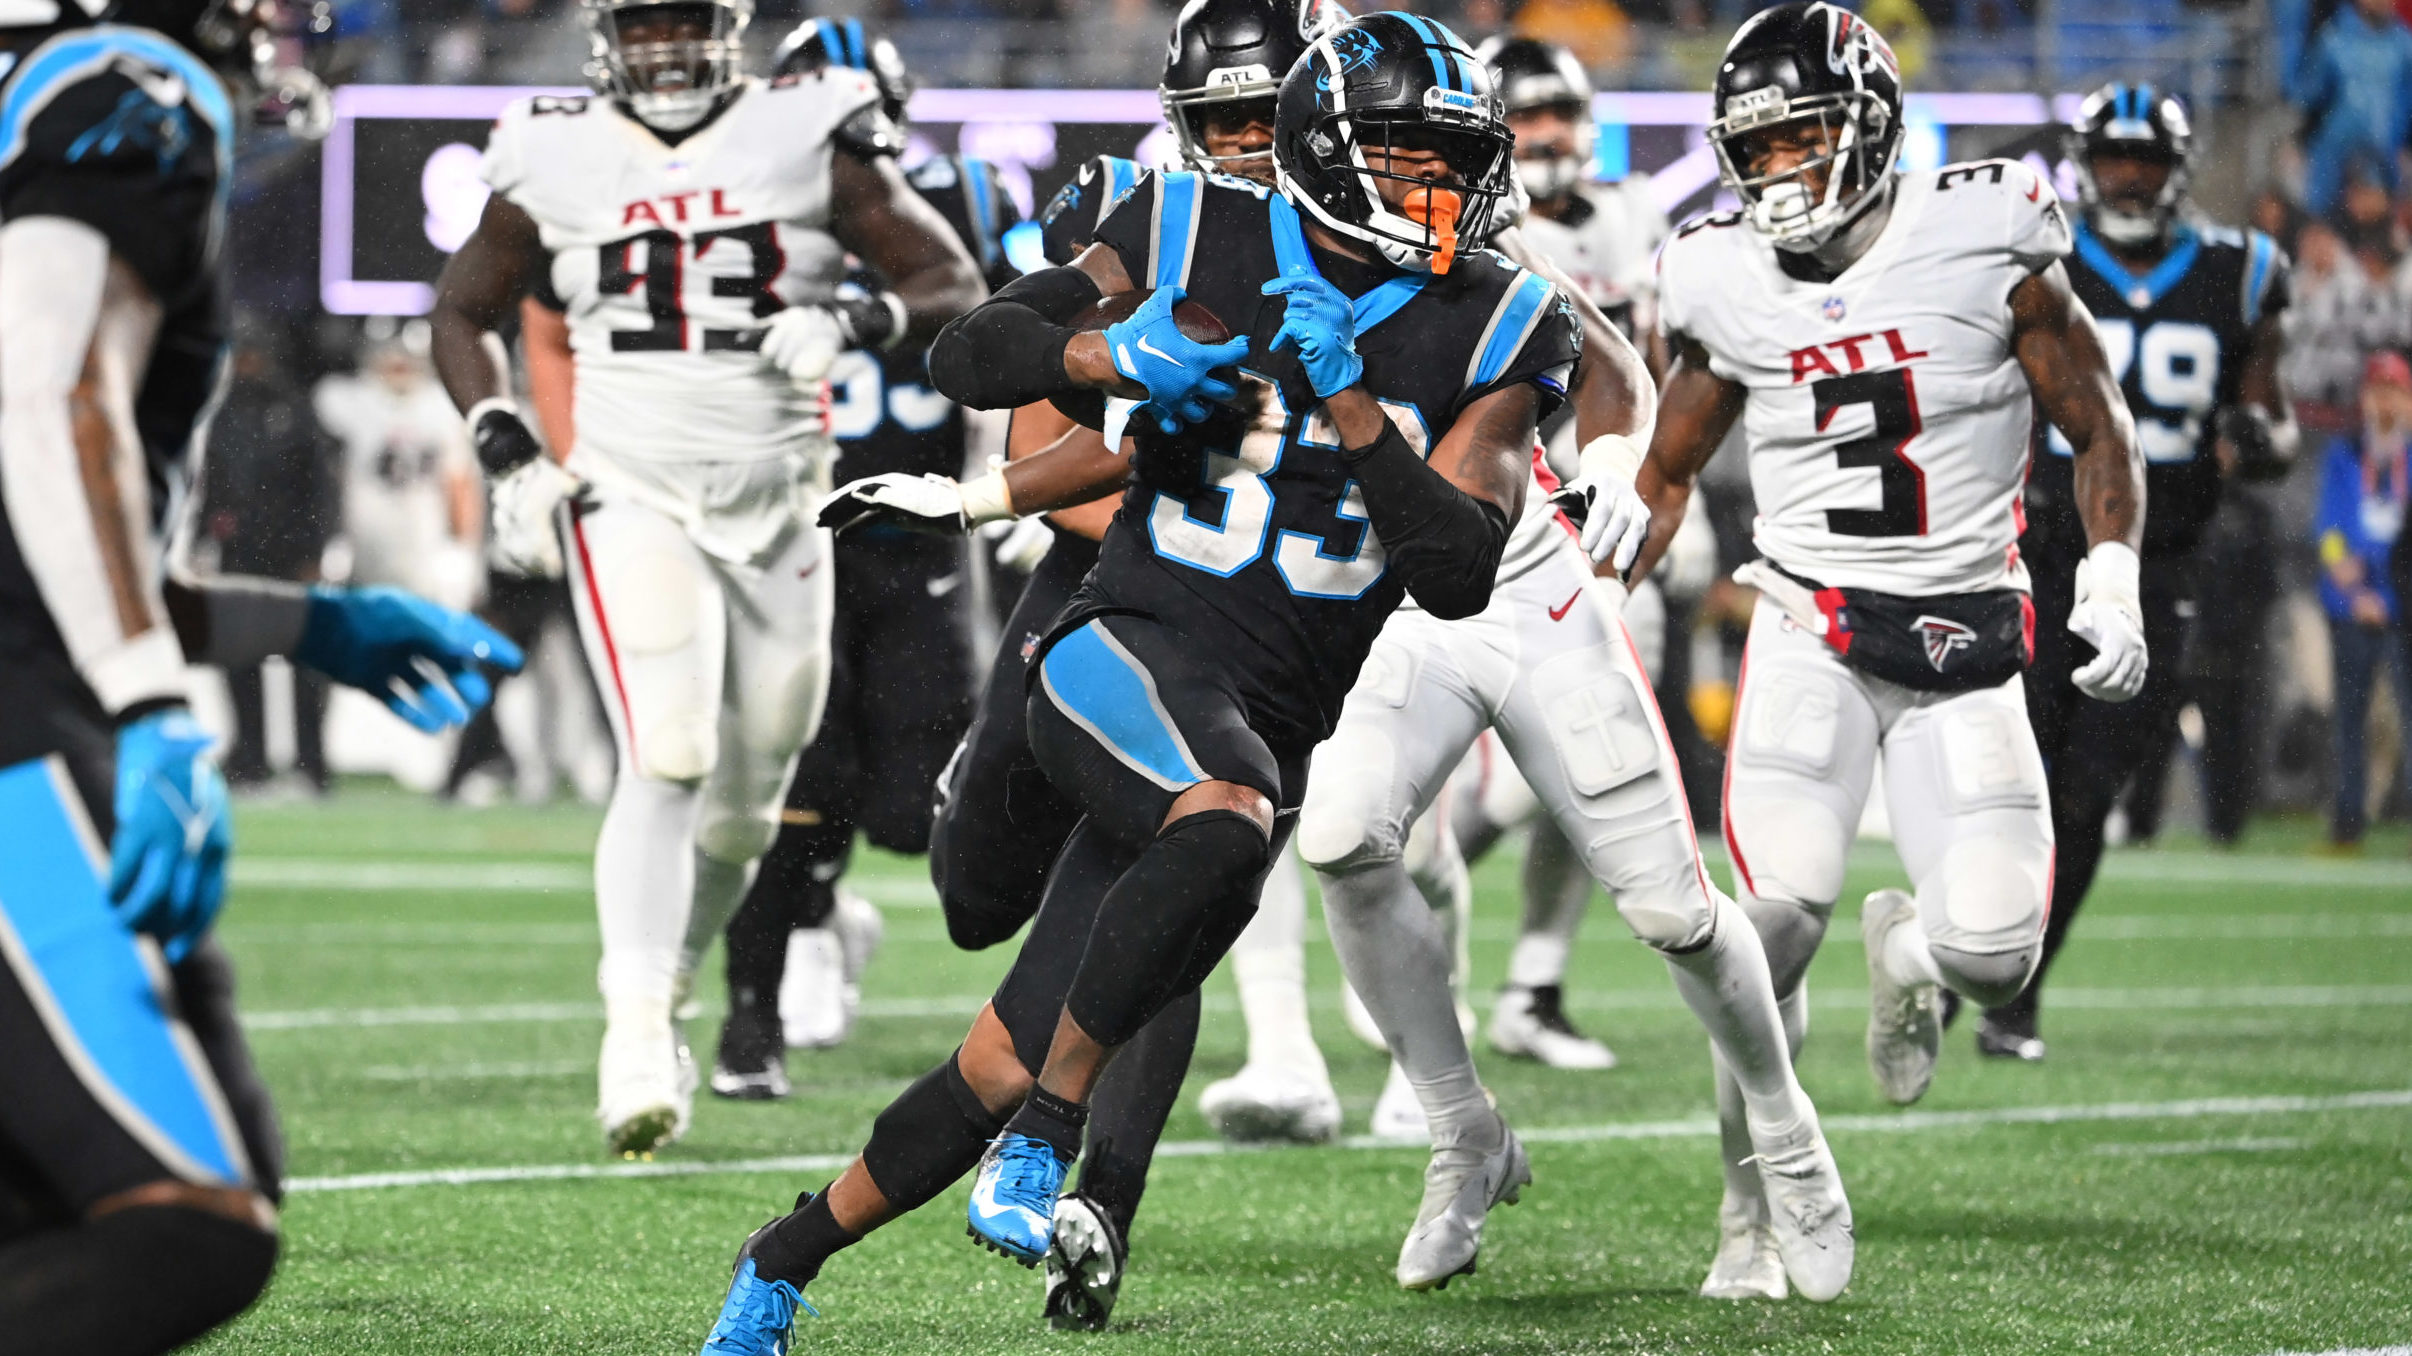 D'Onta Foreman Panthers vs. Falcons